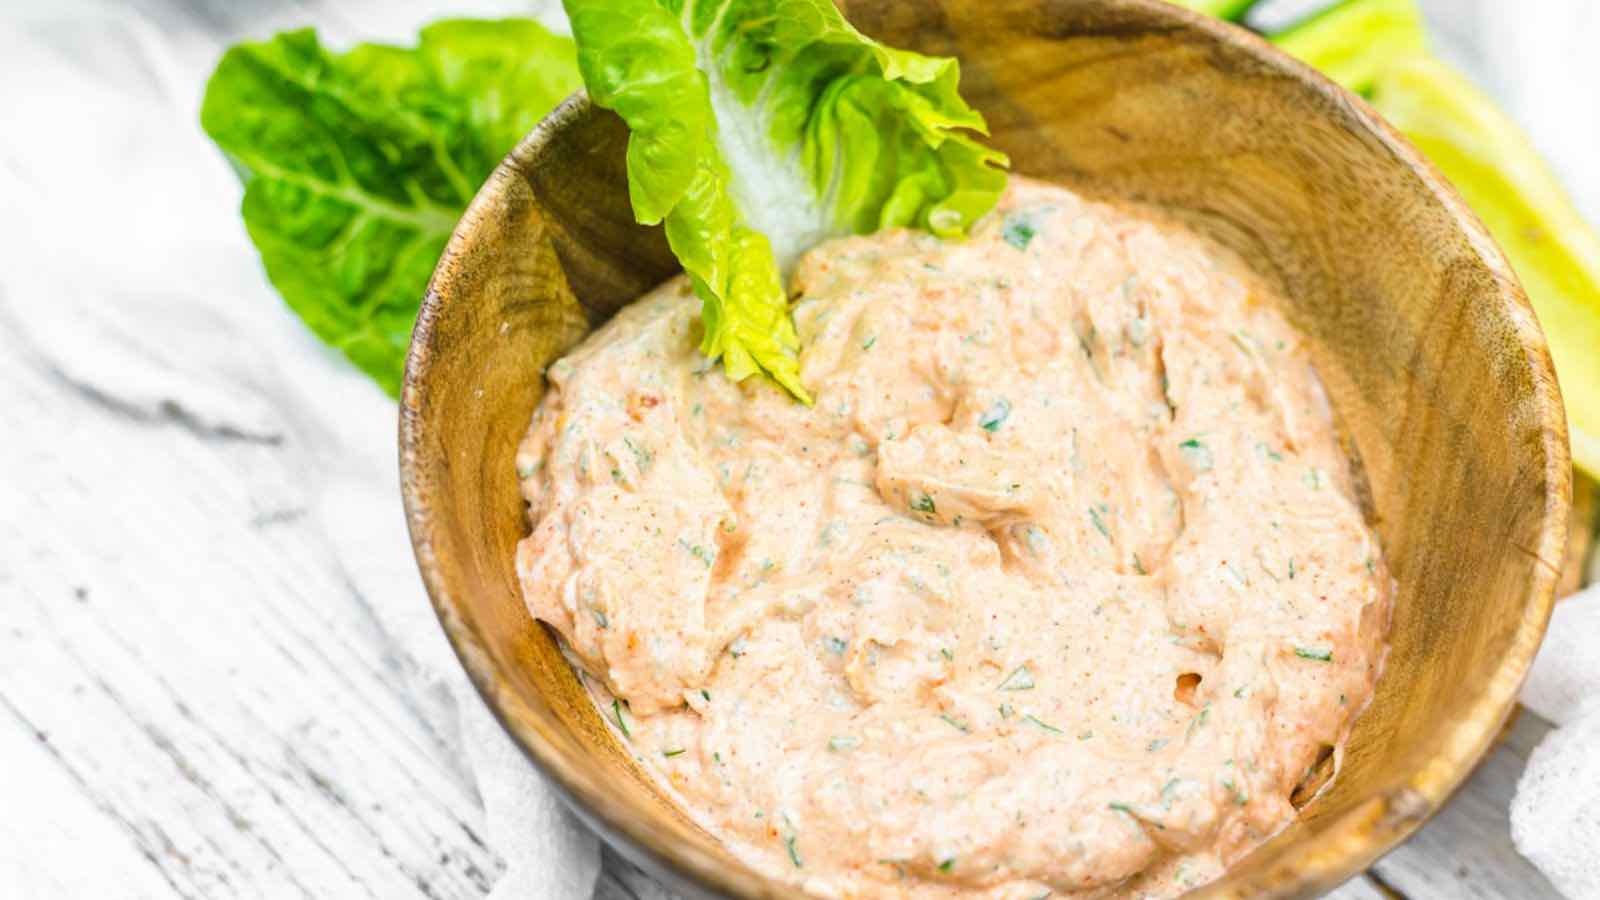 A bowl of creamy, herb-infused Buffalo Ranch dip garnished with a leaf of lettuce on a wooden surface.